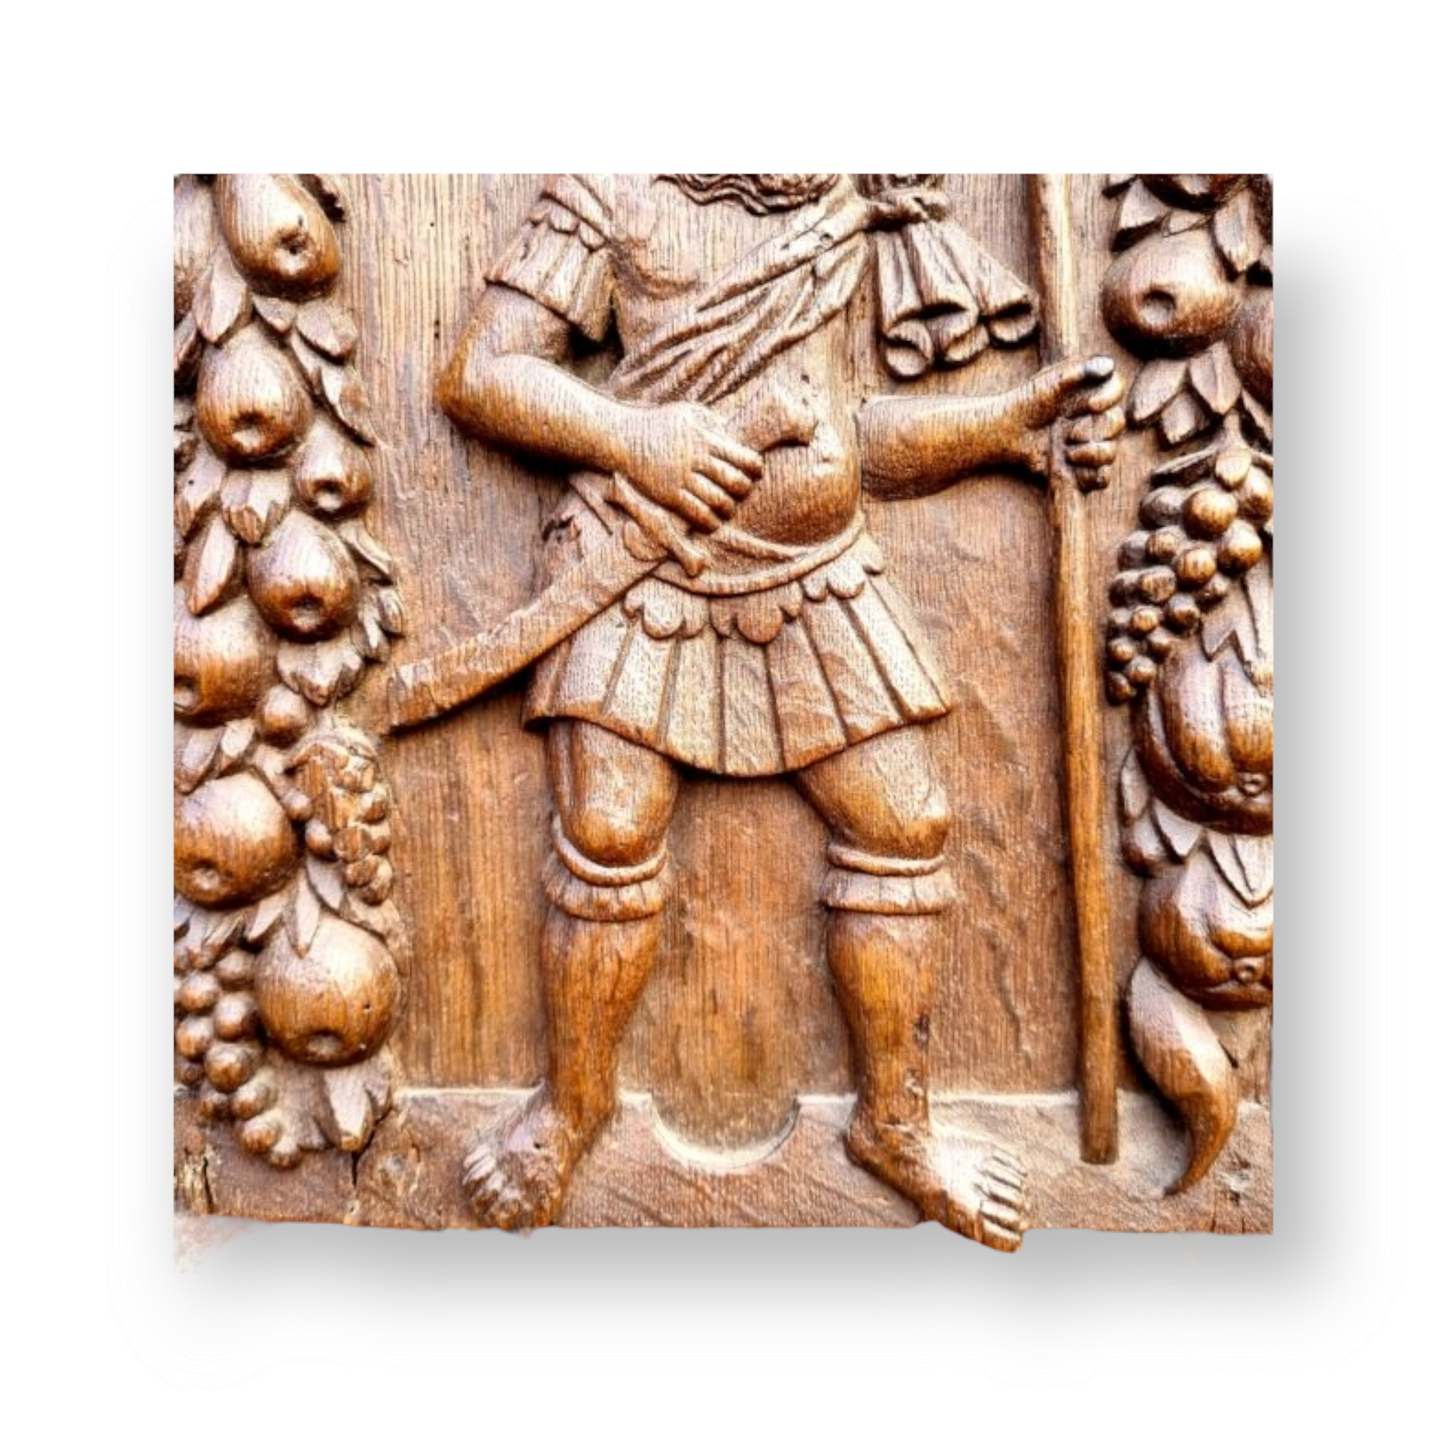 Early 17th Century Flemish Antique Carved Oak Panel Depicting a Warrior